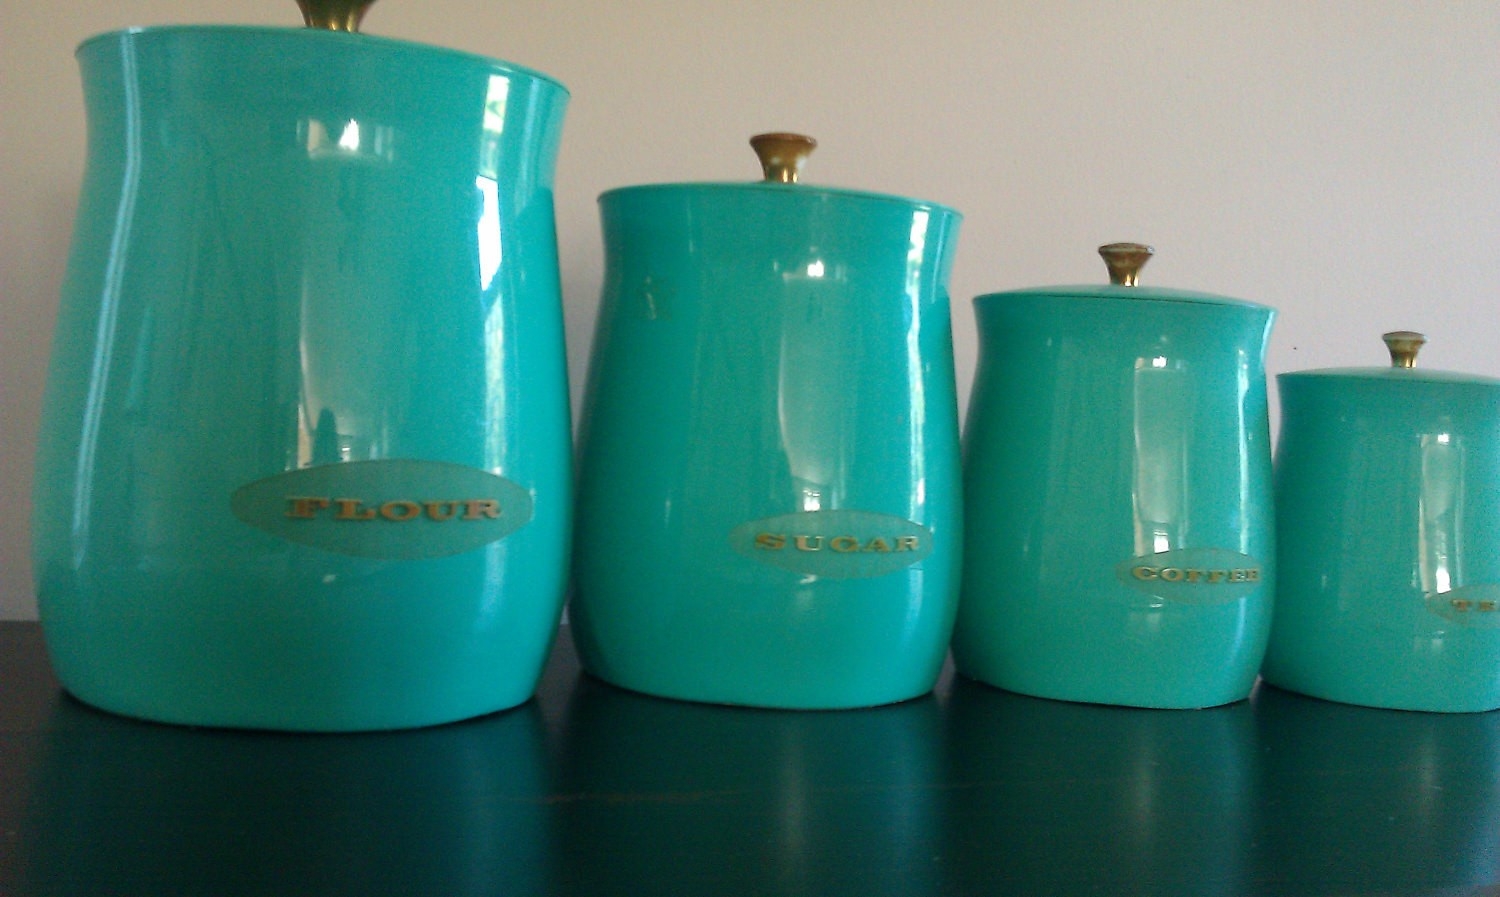 https://foter.com/photos/title/teal-kitchen-canisters.jpg